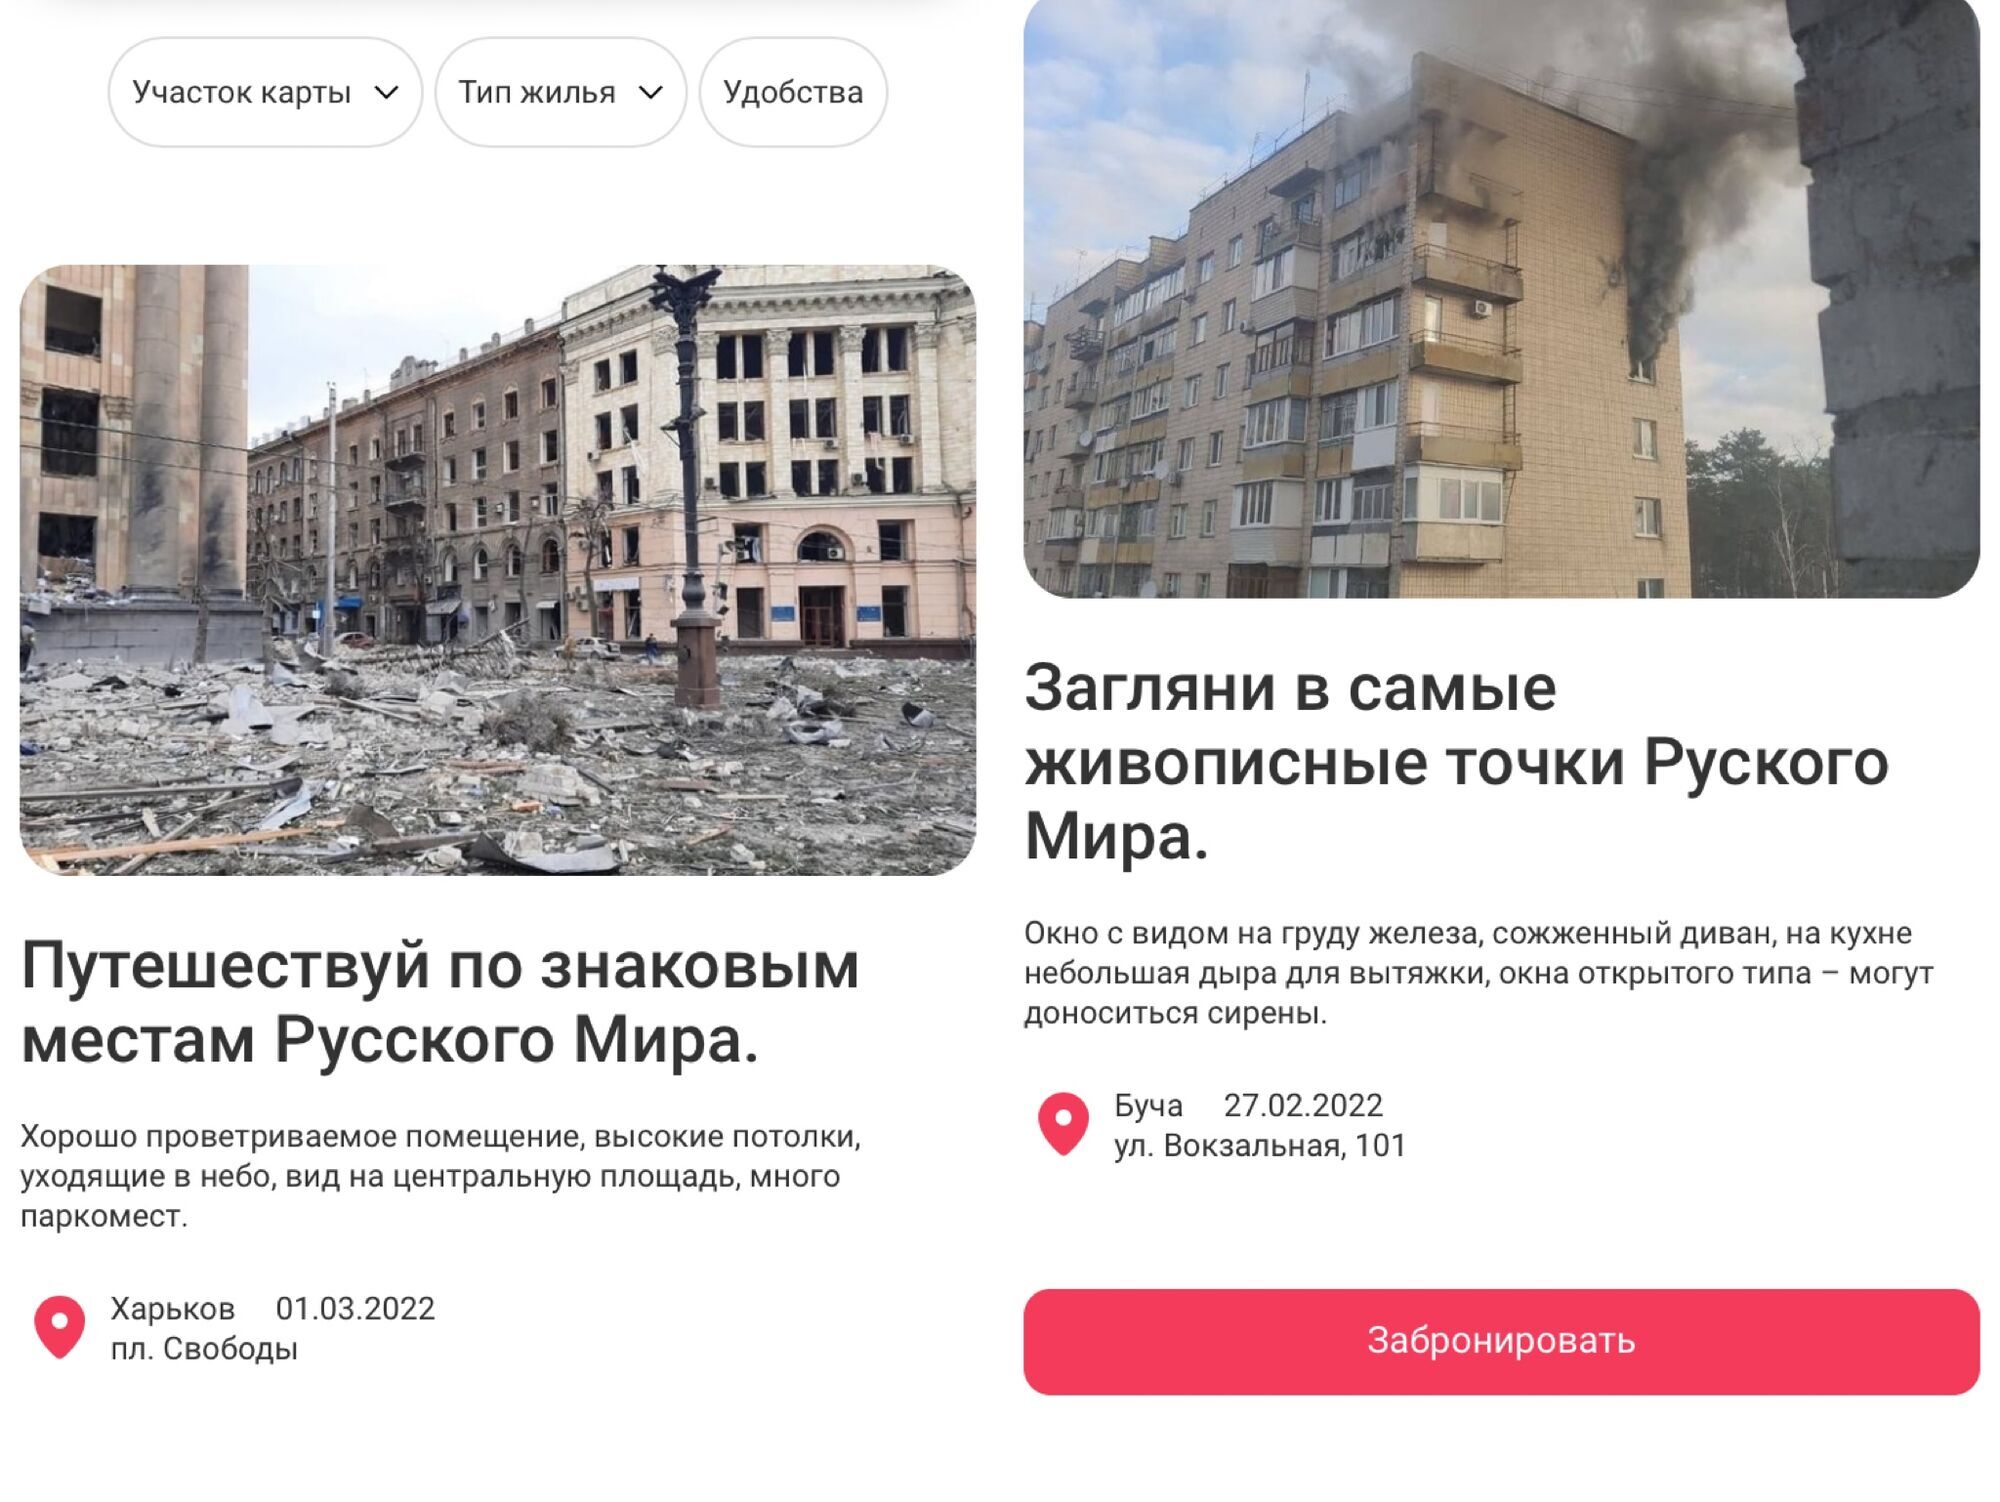 Airbnb russian edition